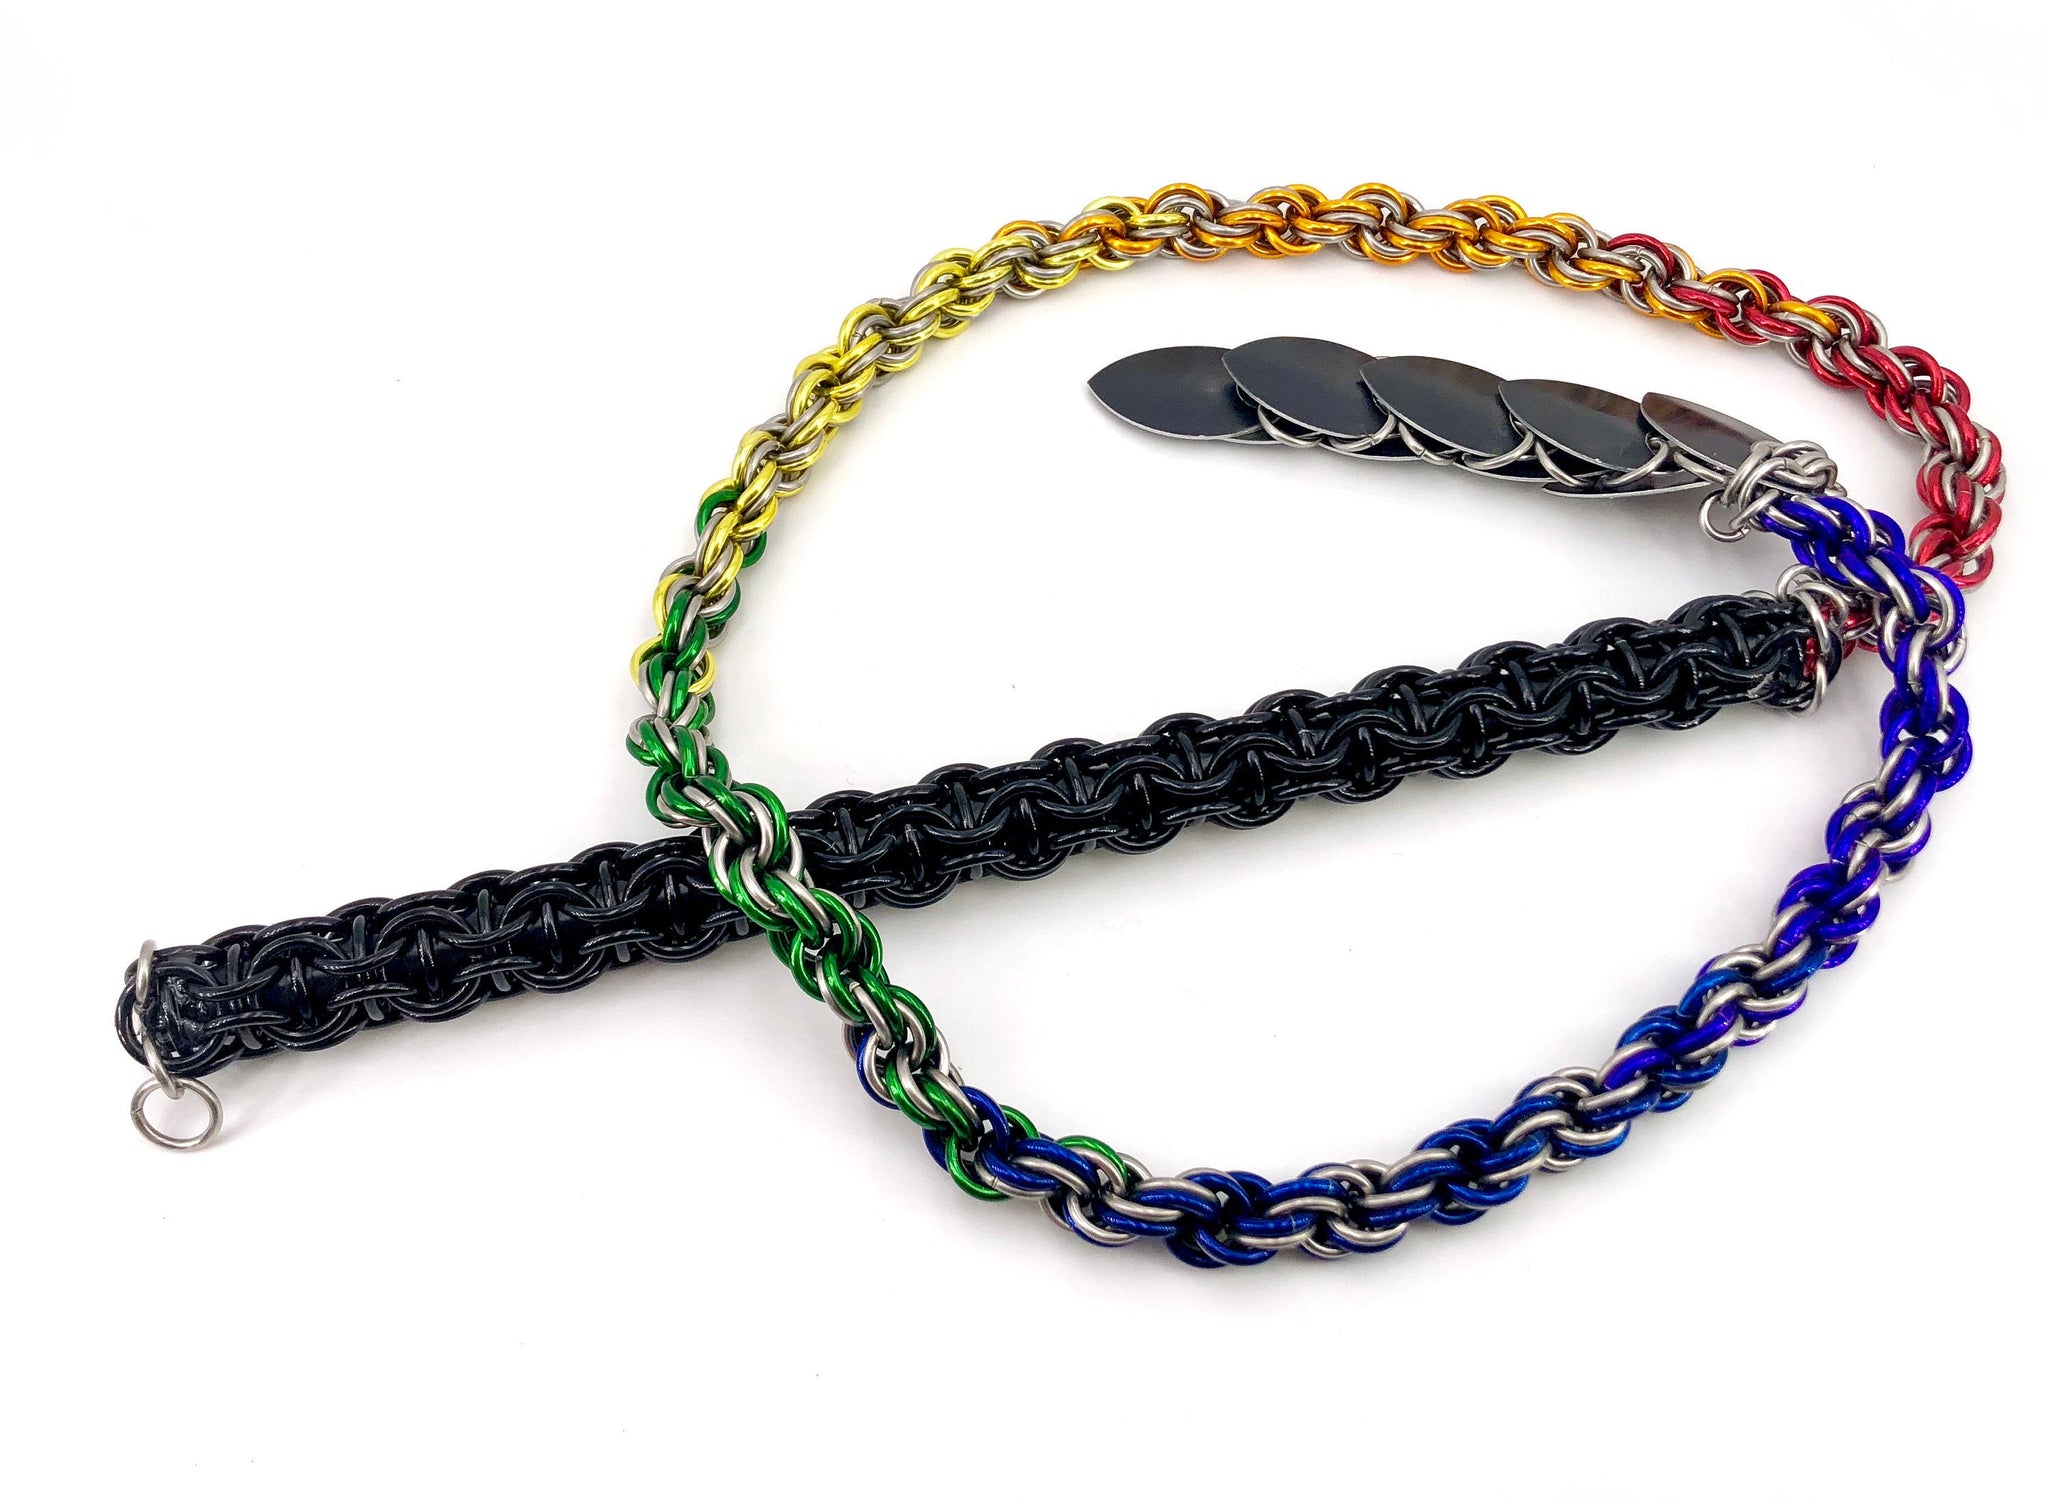 Rainbow BDSM Chainmaille Whip